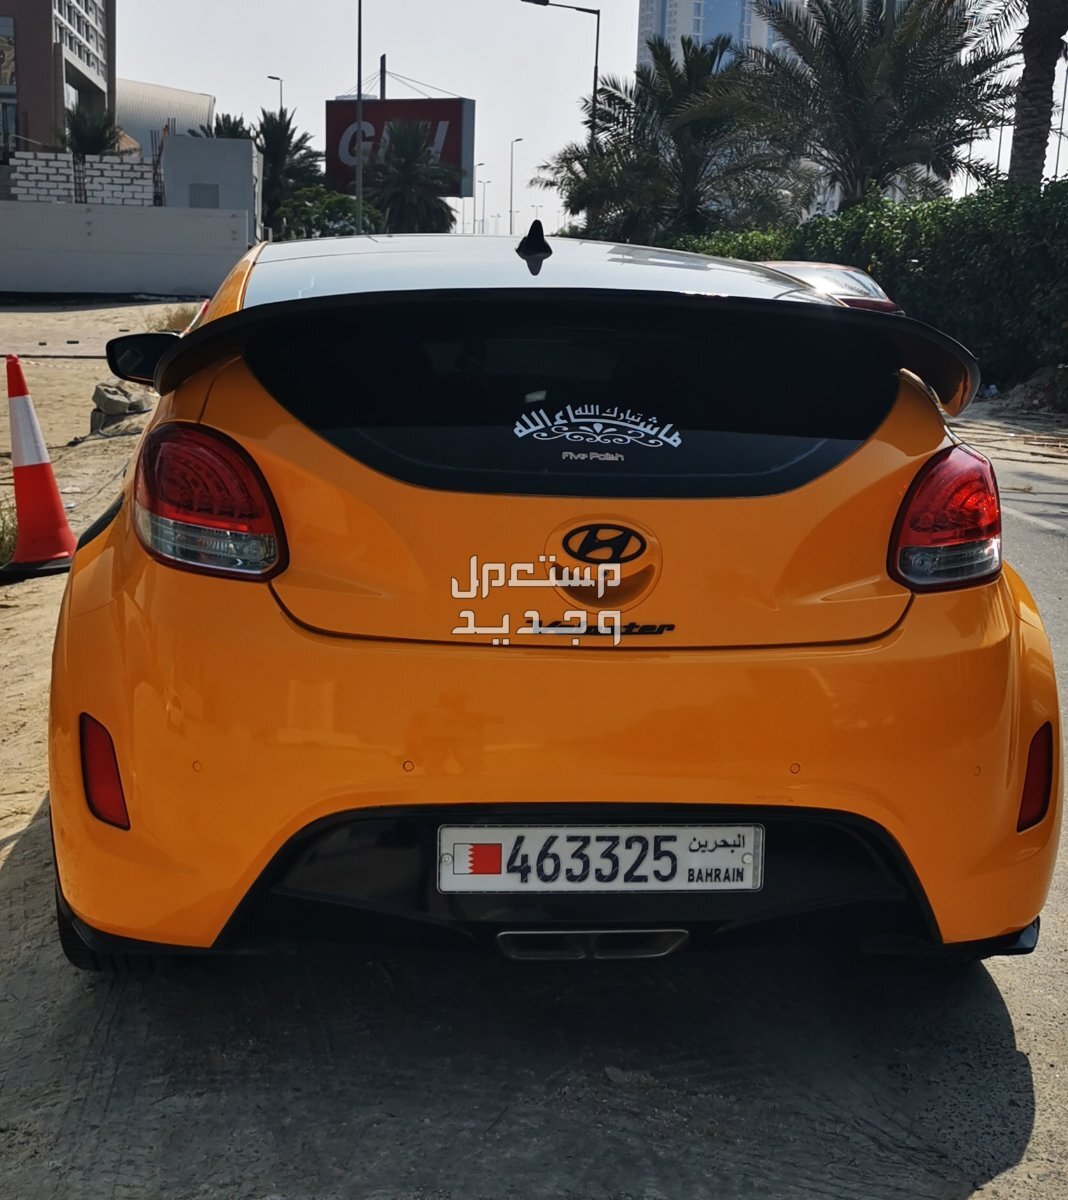 Hyundai Veloster 2014 in Muharraq at a price of 3400 BHD